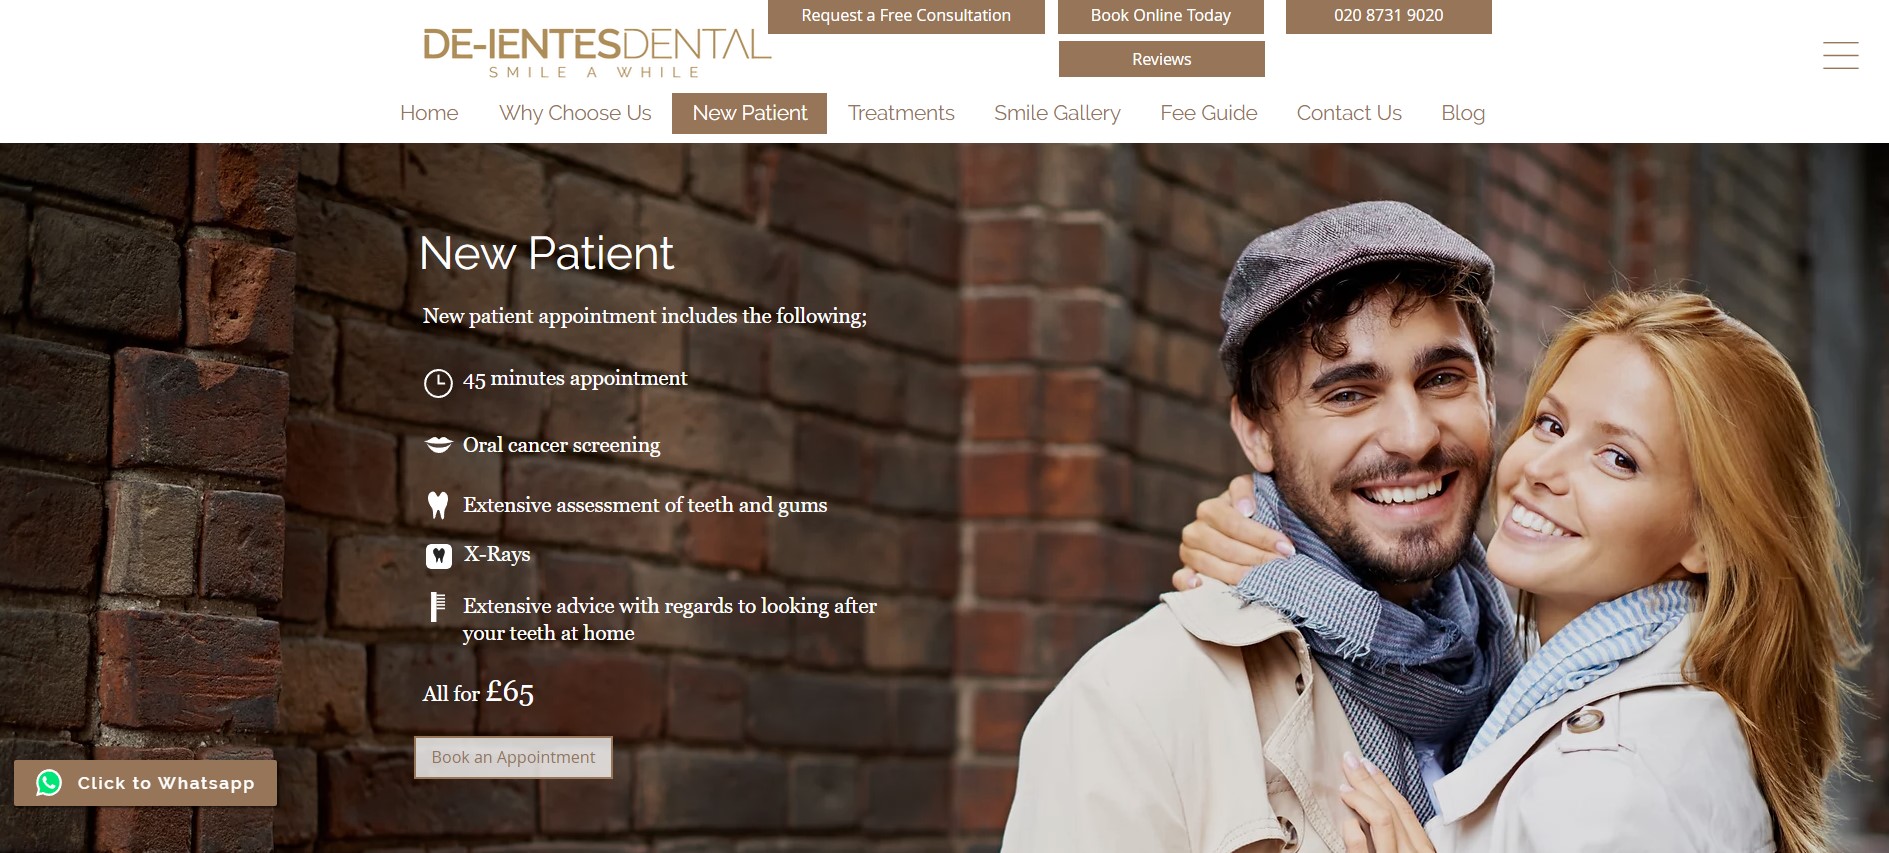 Image shows the New Patients page on the De-ientes Dental website.